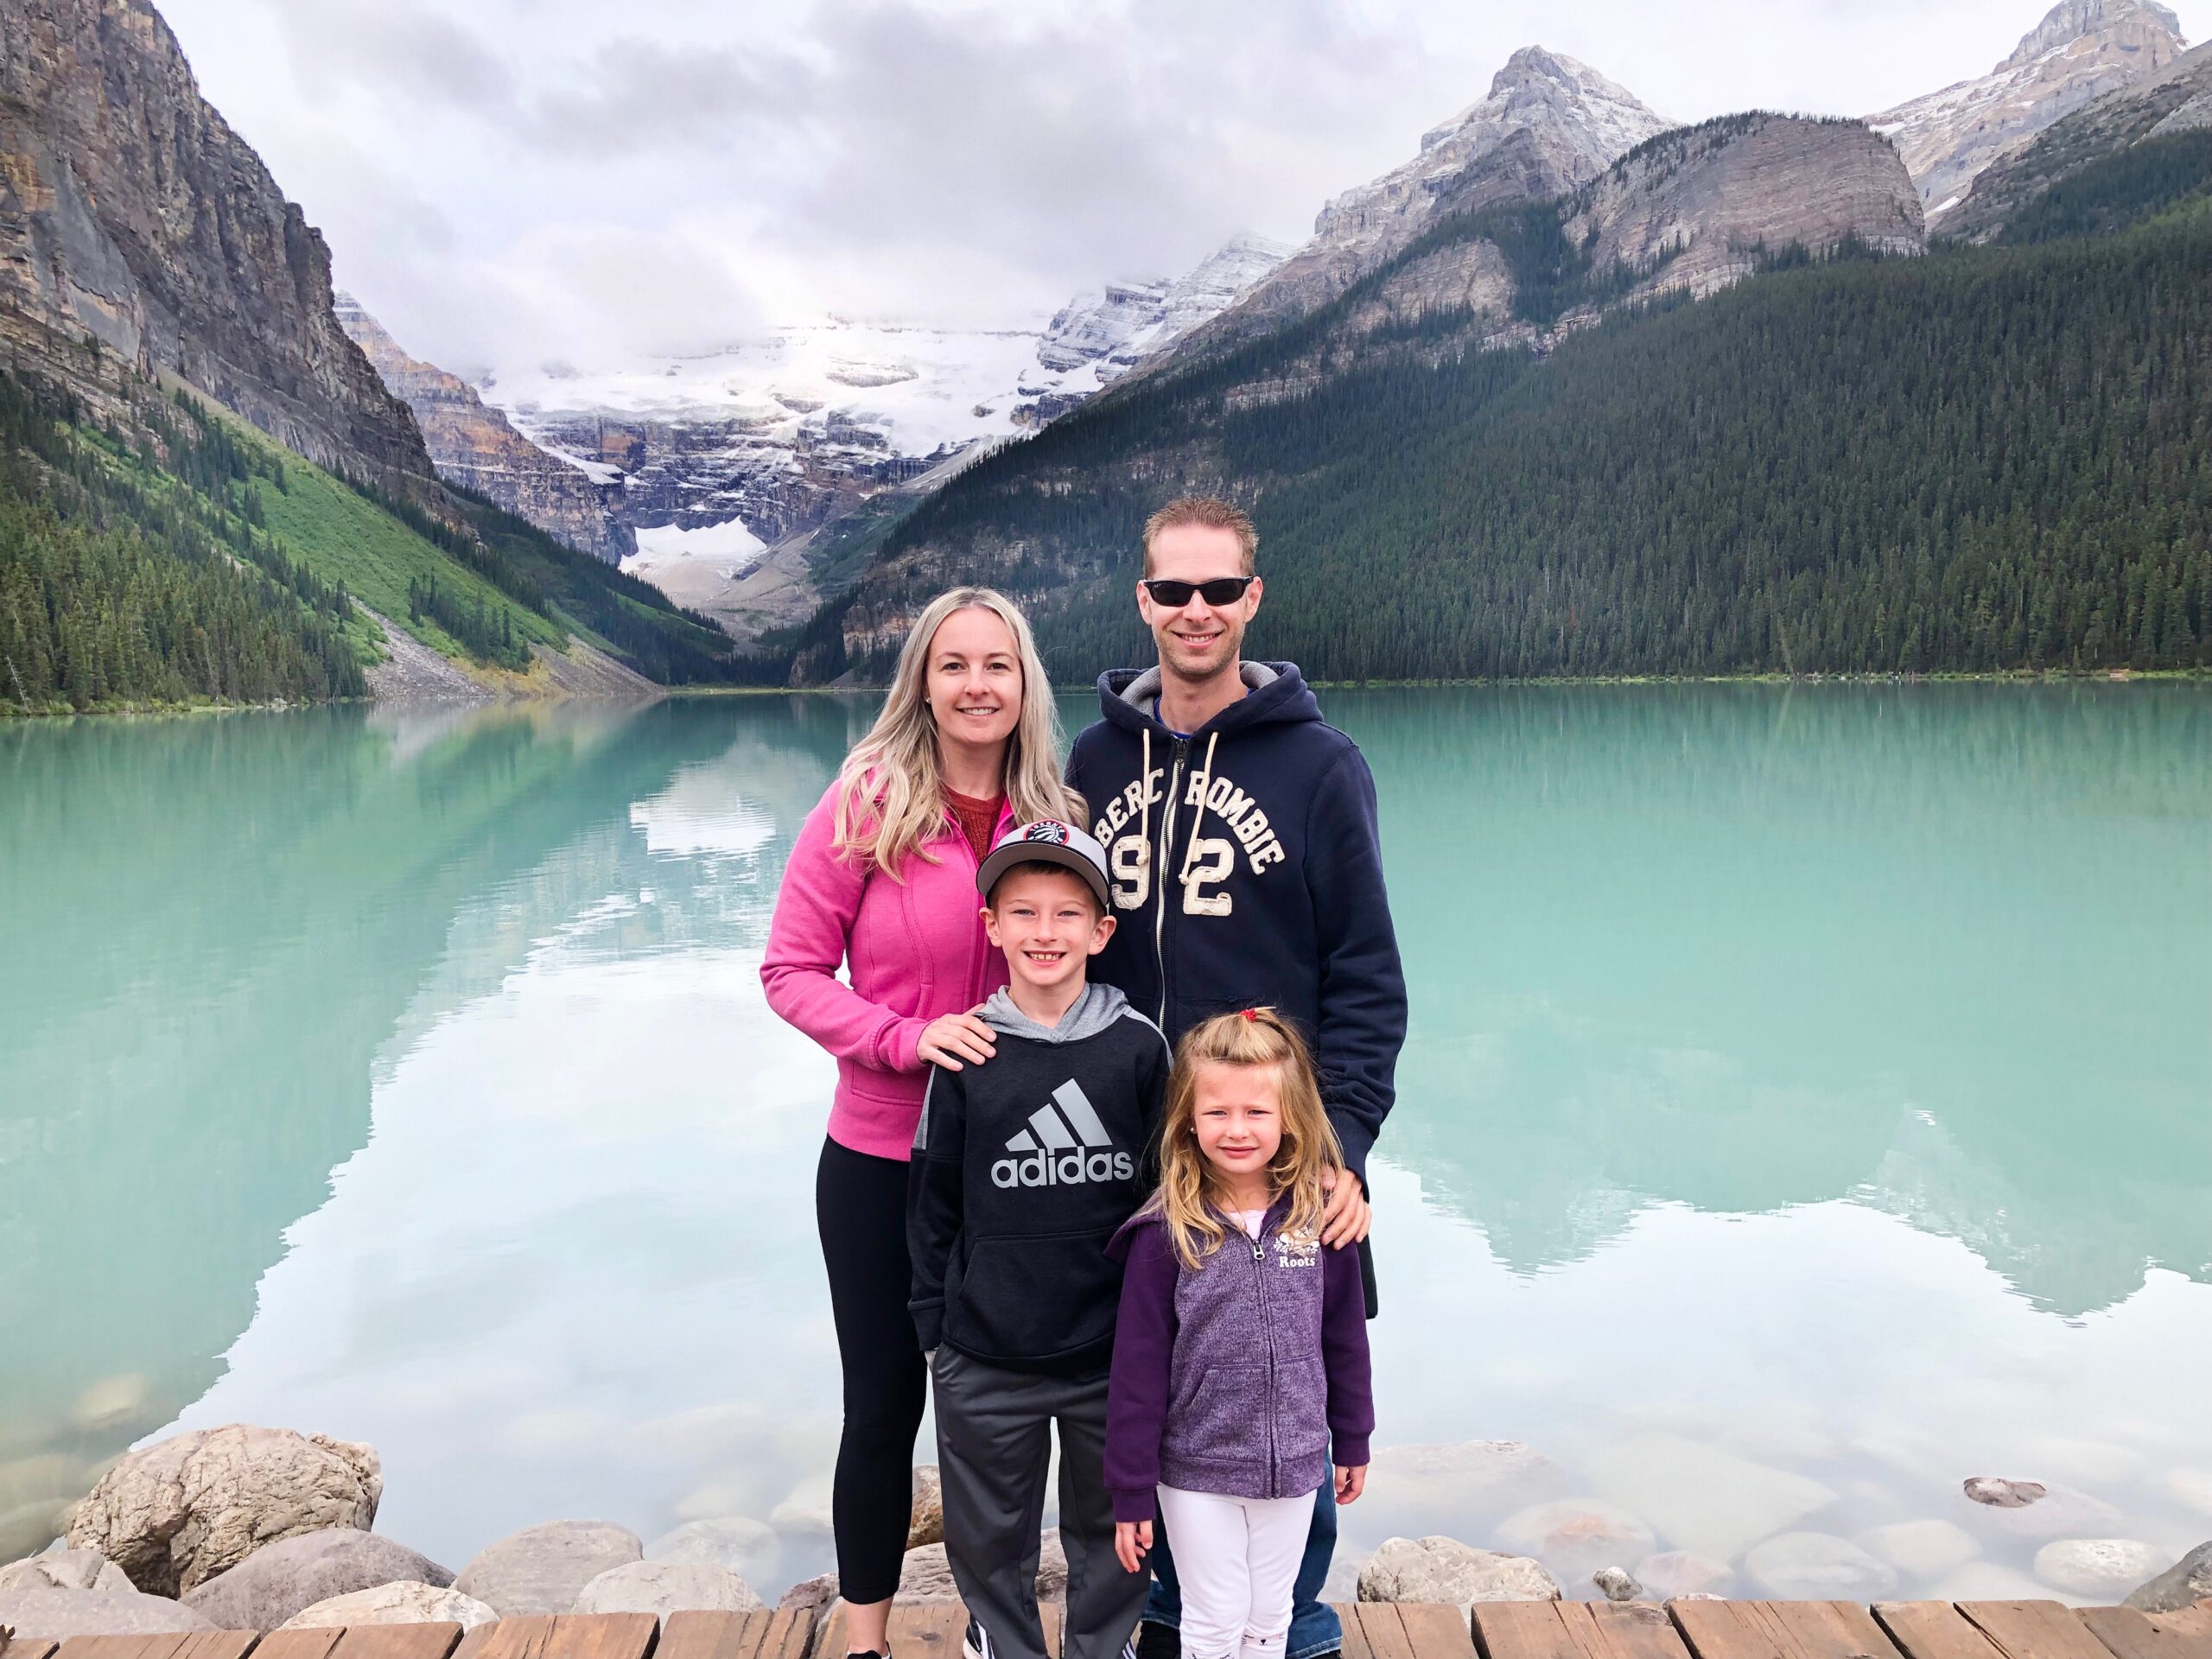 Banff Travel Guide- Lake Louise on Livin' Life with Style